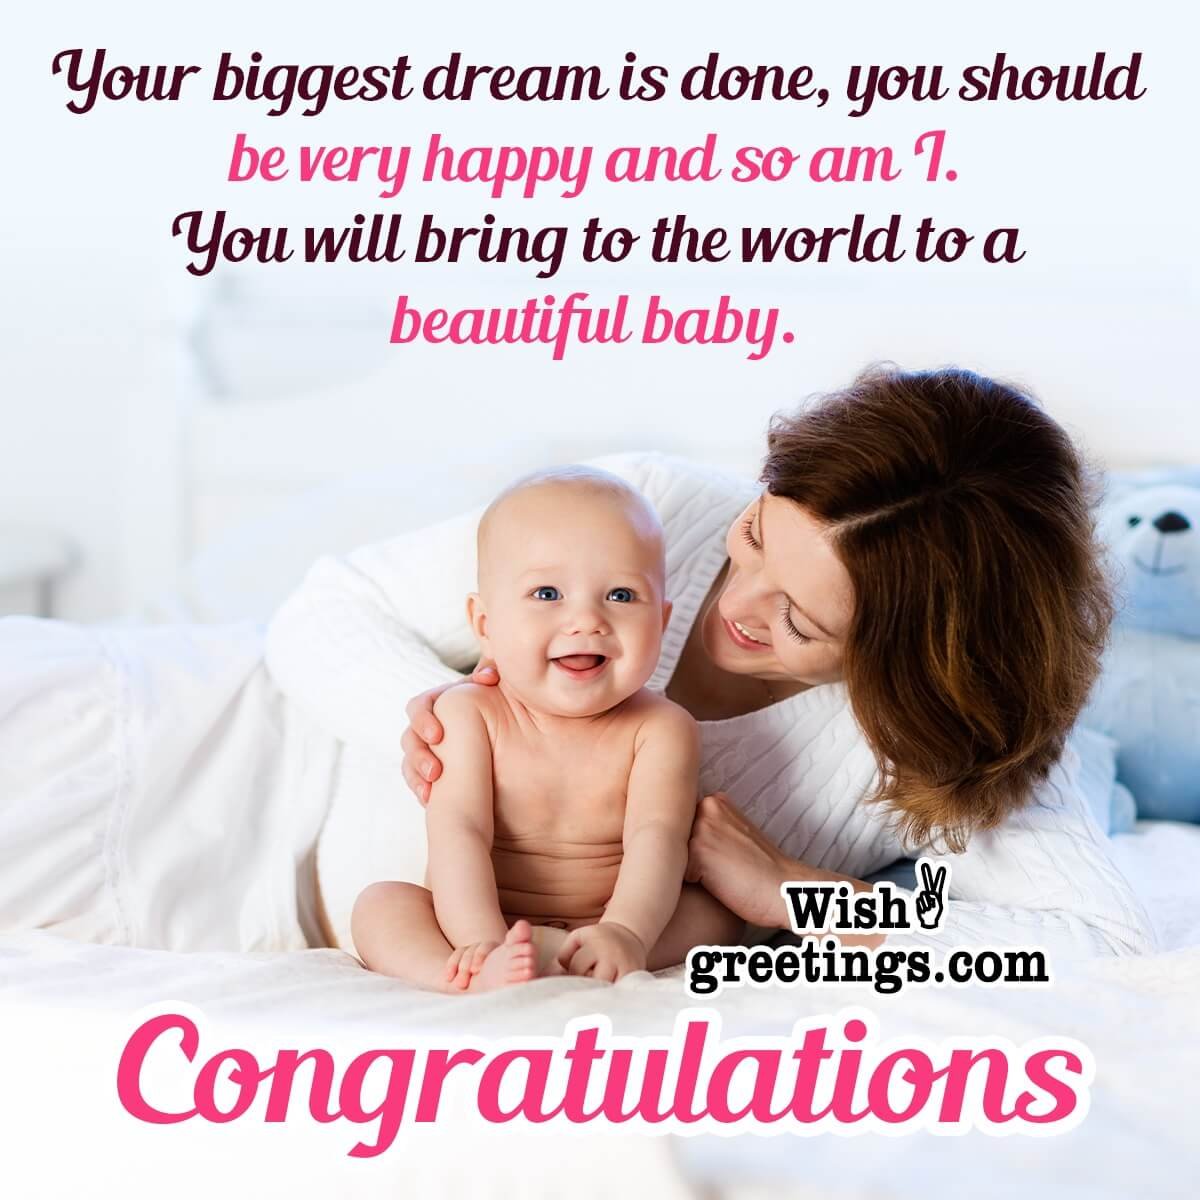 Congratulations Message For Baby Shower